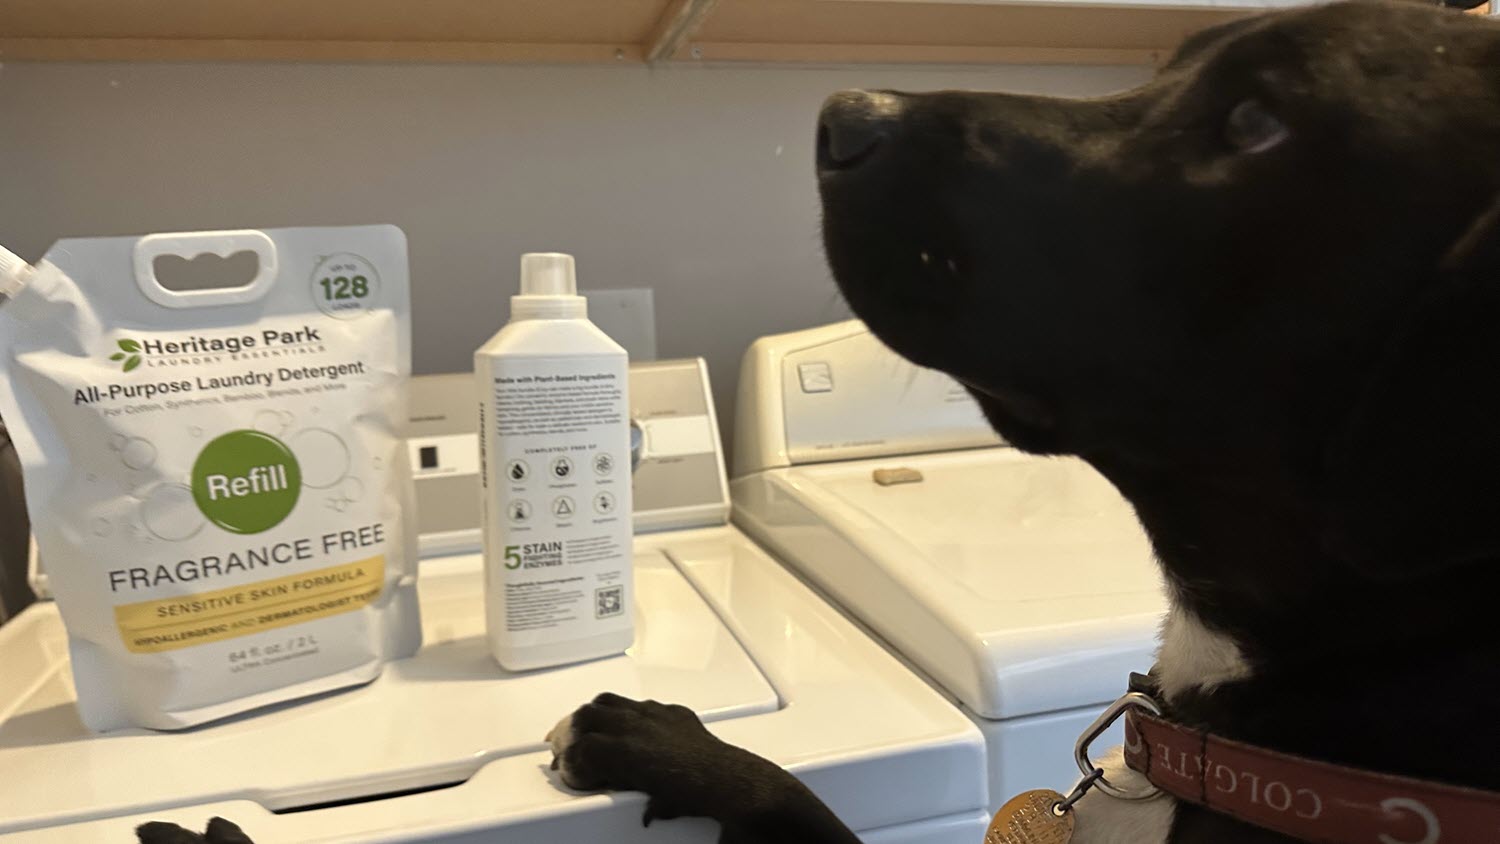 Use a Pet-Safe Hypoallergenic Detergent for Your Pet's Gear and Accessories